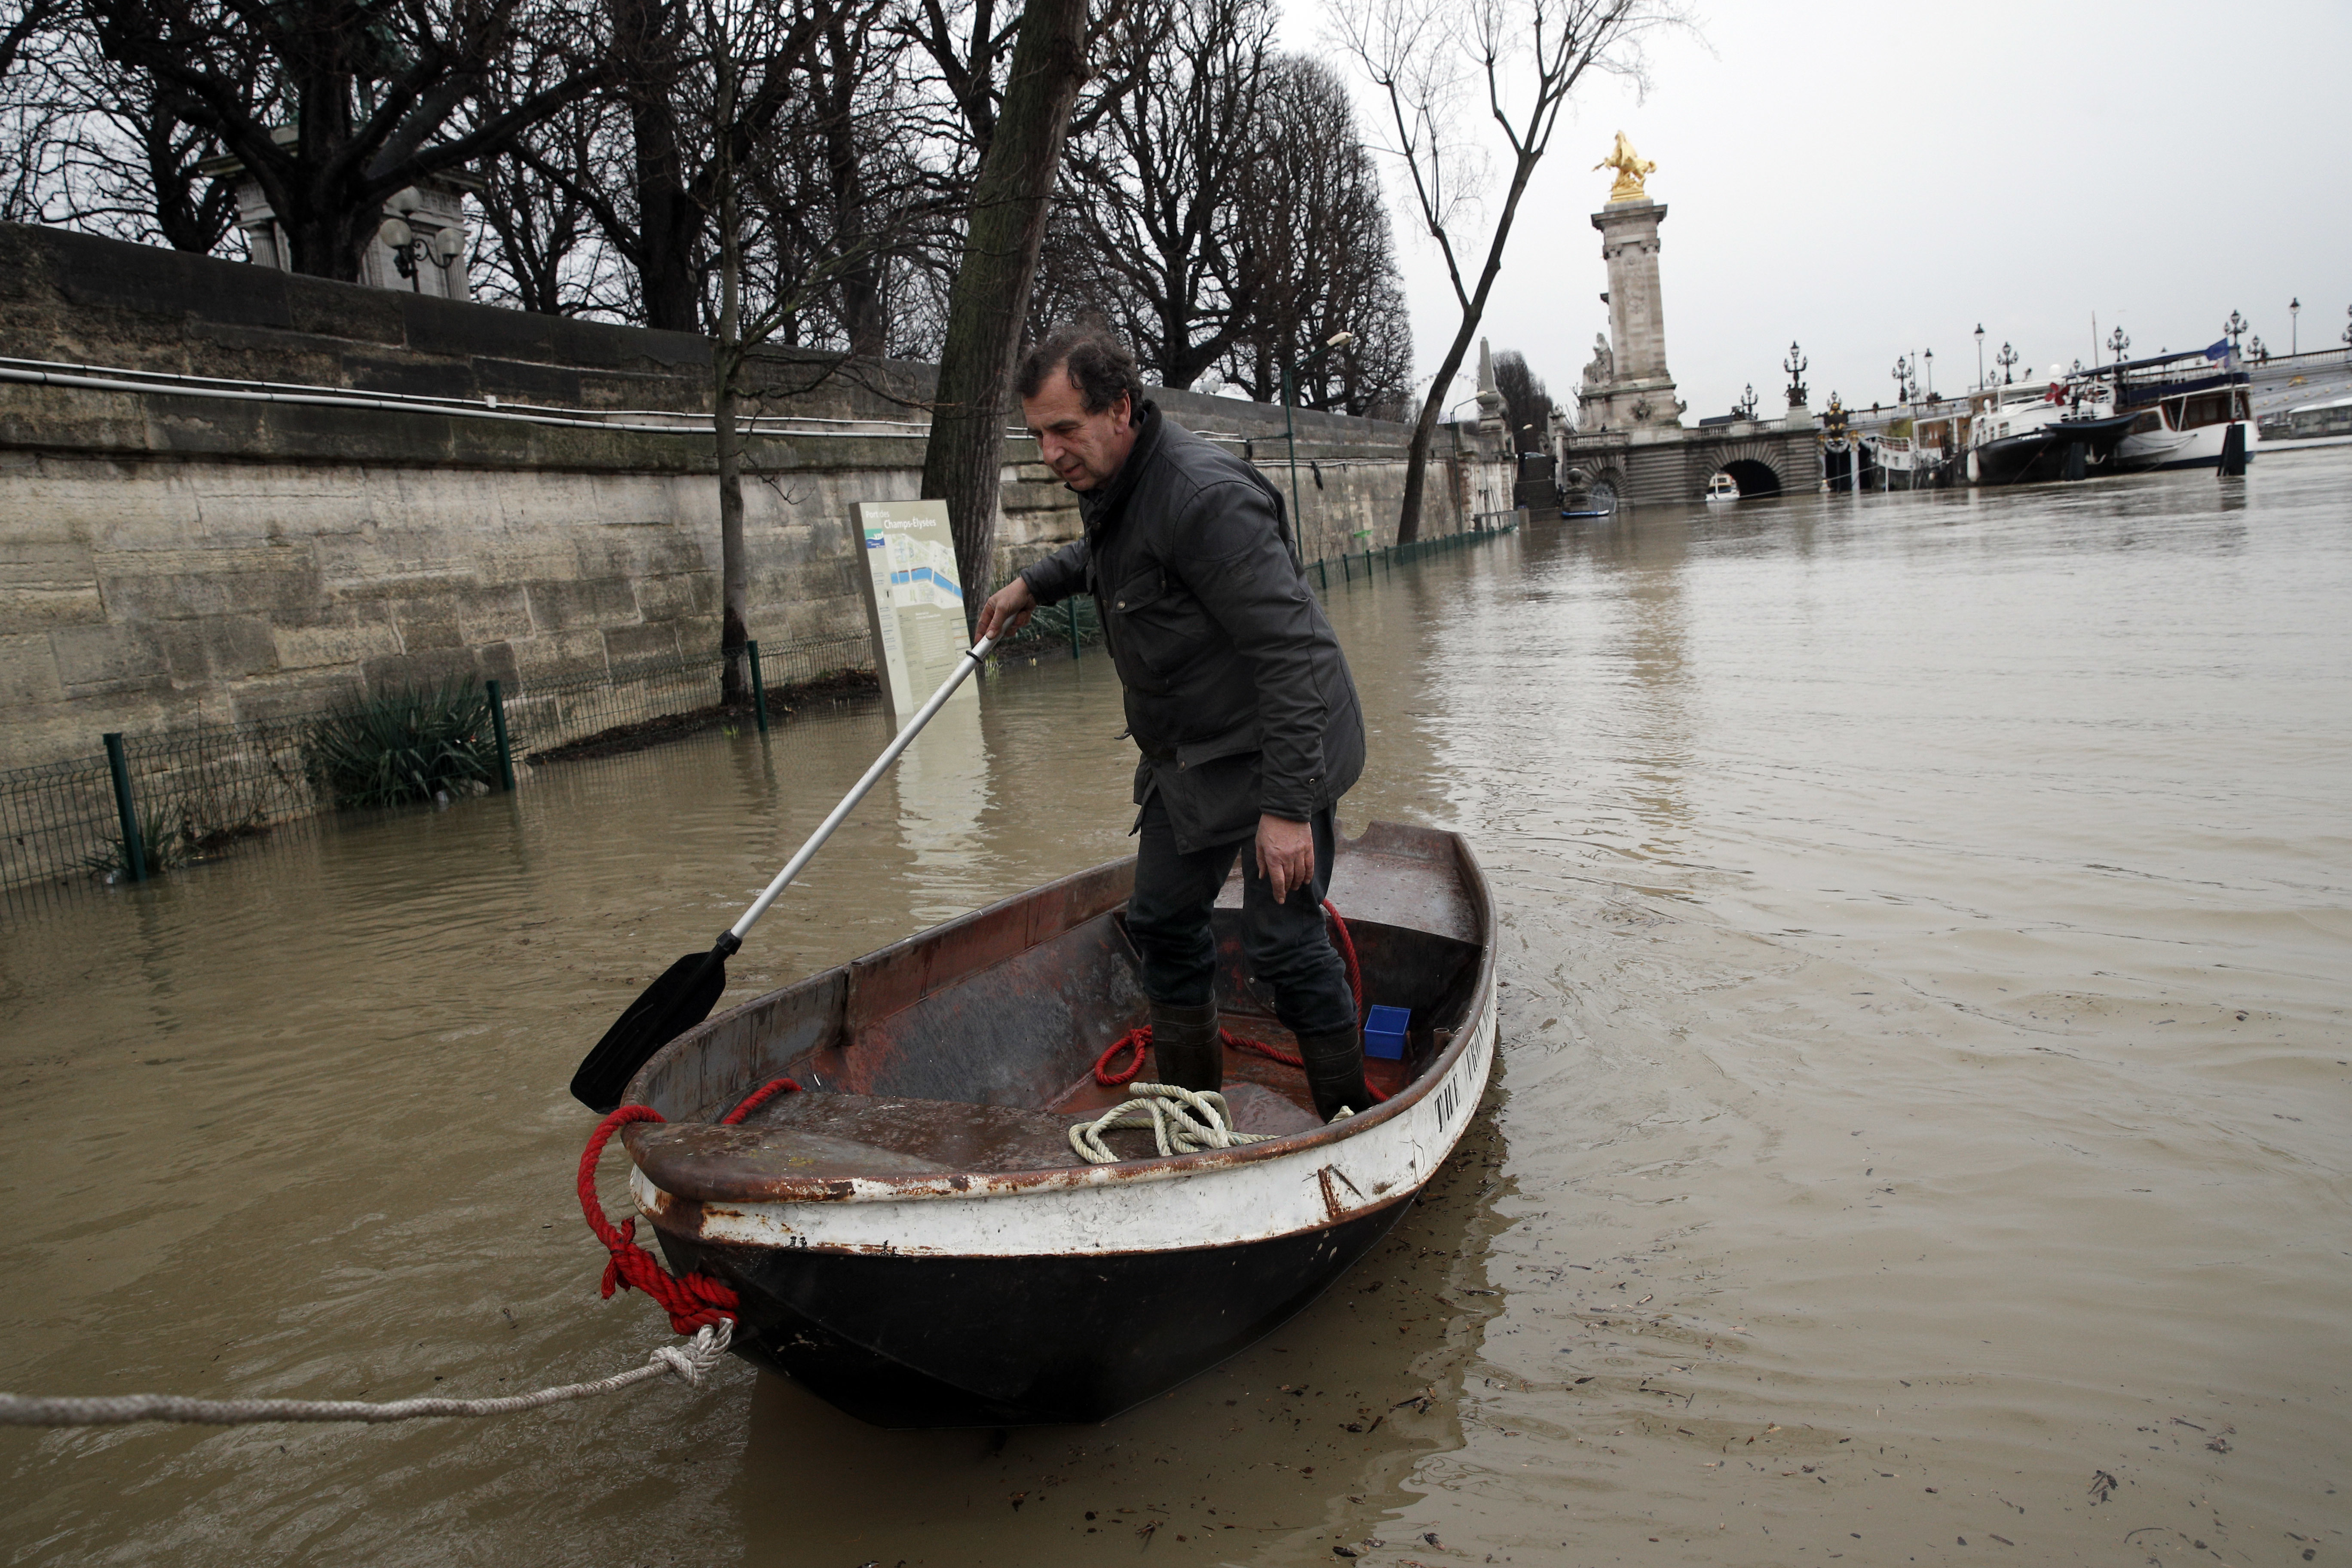 A man uses a dinghy boat to reach his barge on the river Seine in Paris (Christophe Ena/AP)